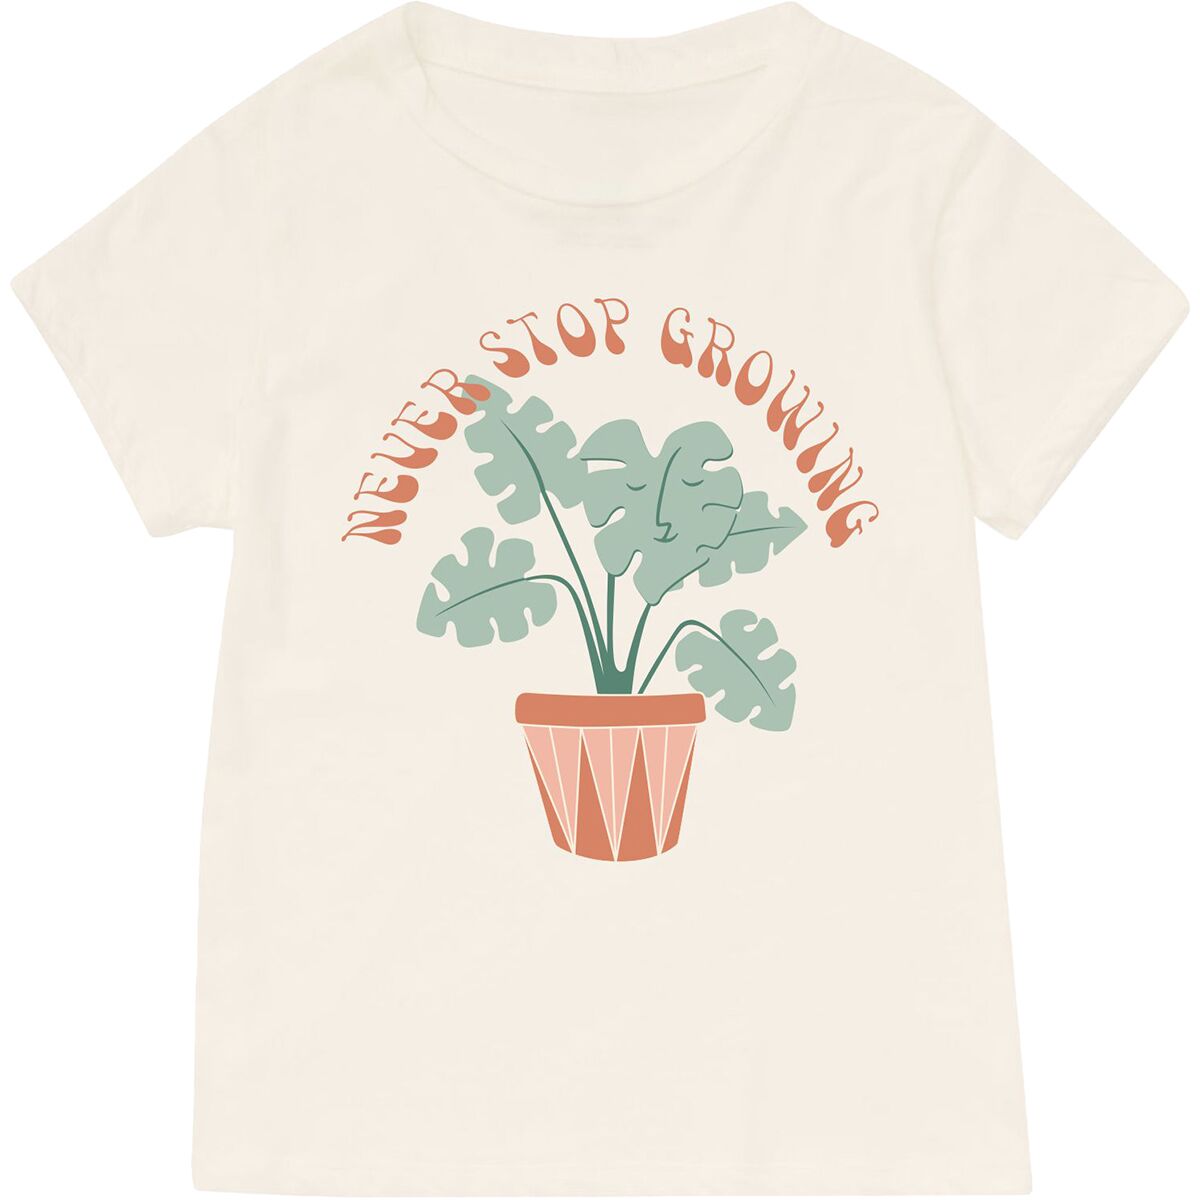 Tiny Whales Never Stop Growing T-Shirt - Toddlers'